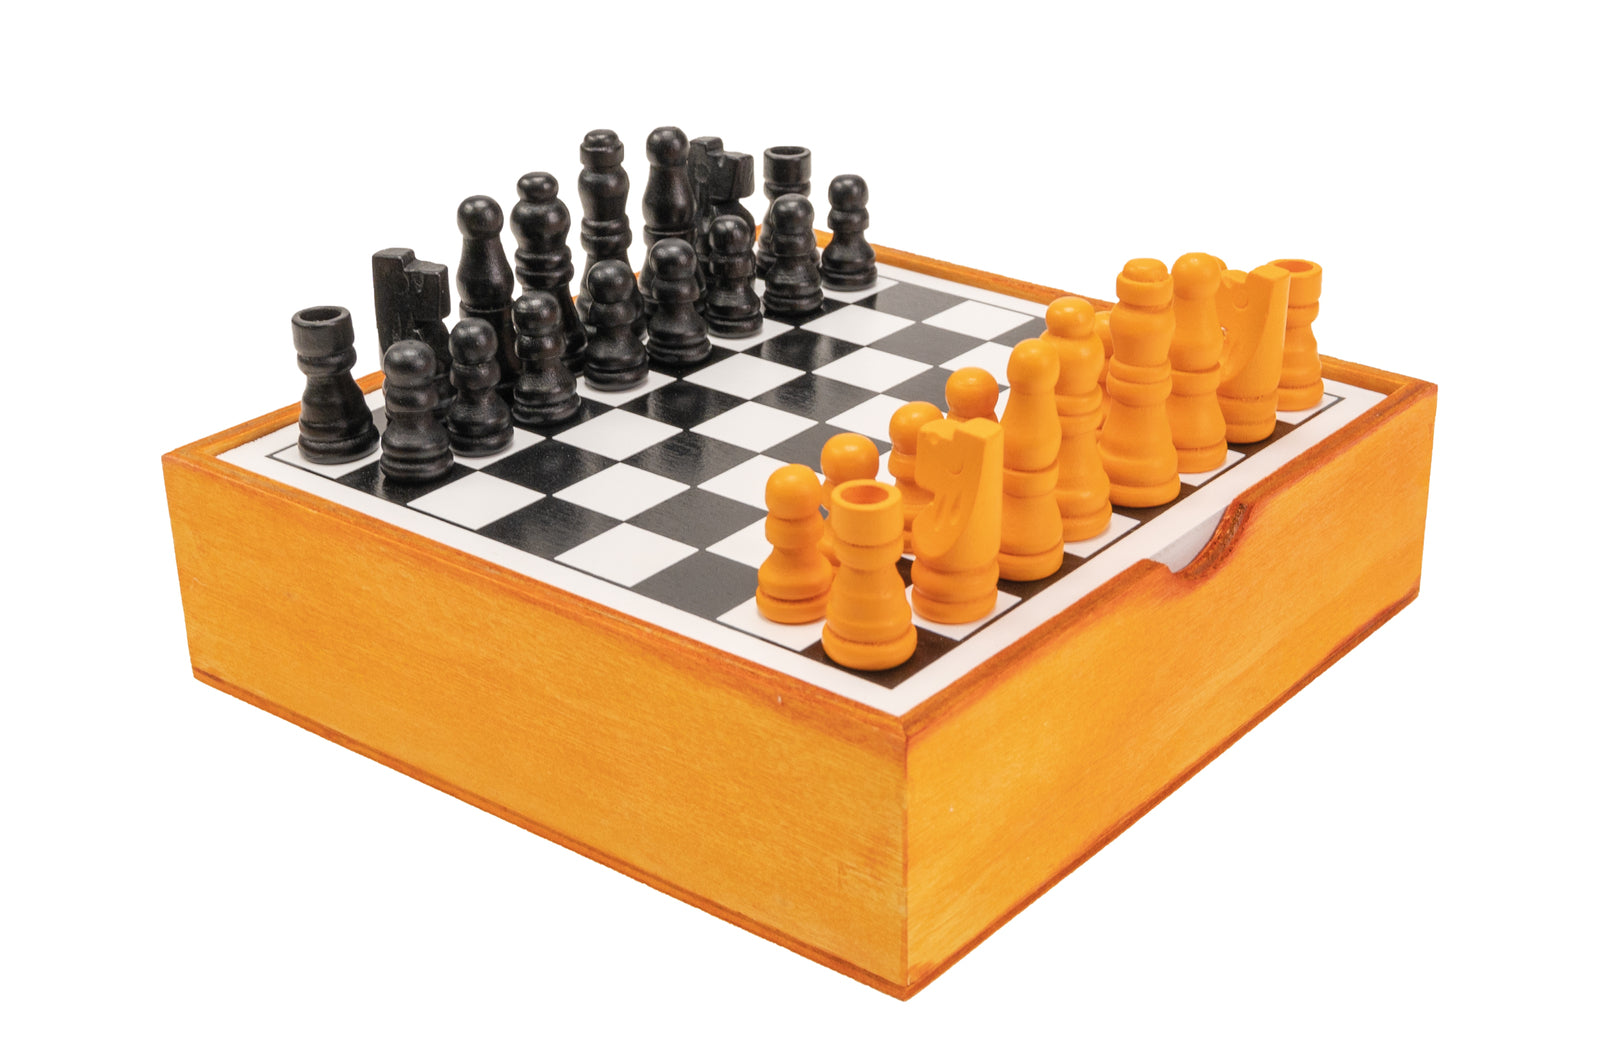 Wooden Classic Chess